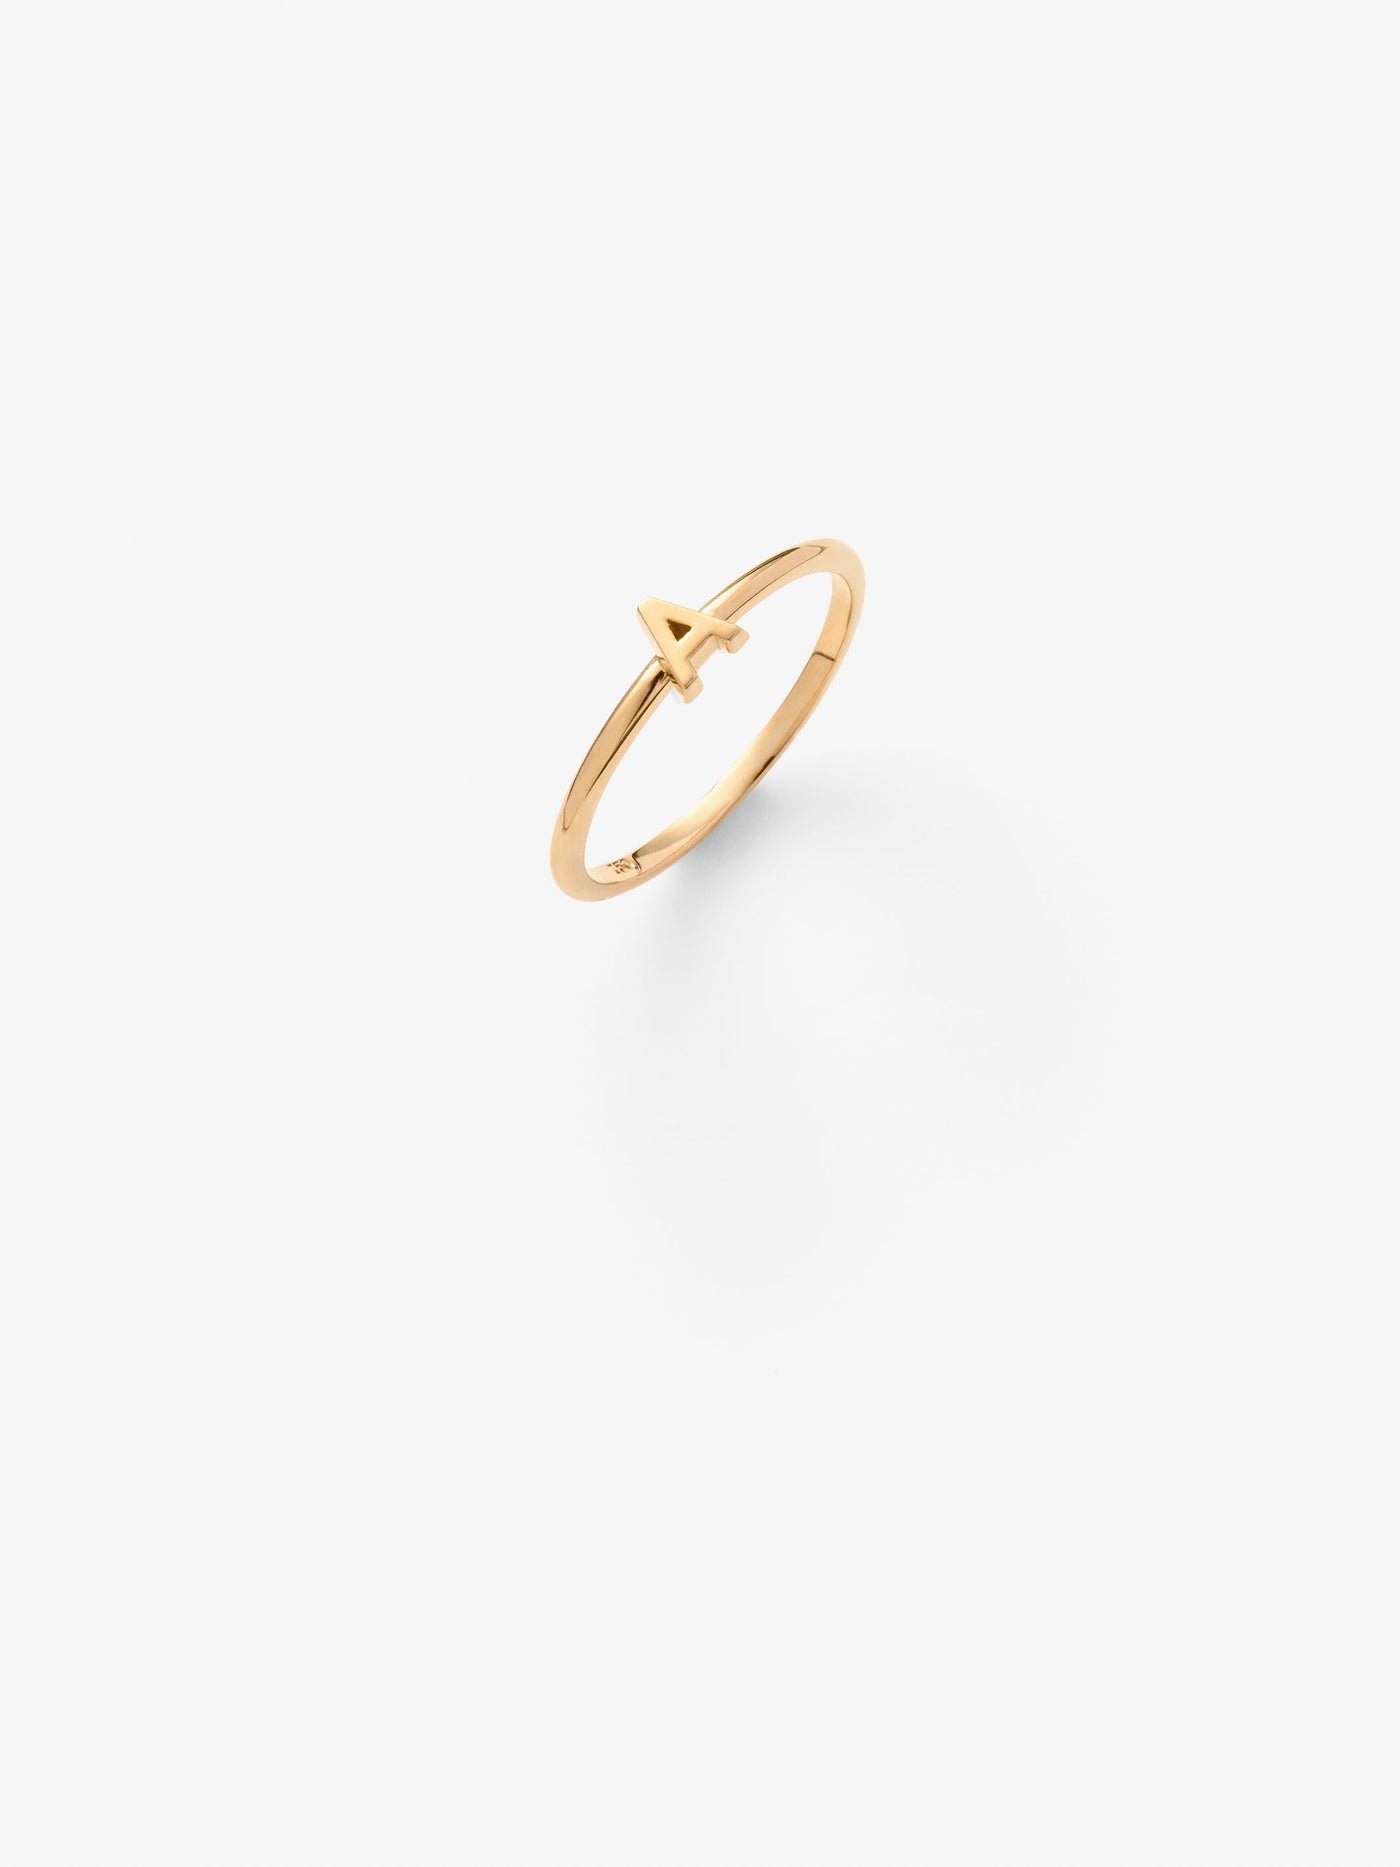 Close-up image of a personalised A  gold ring adorned with intricate, miniature dimensional letters from the alphabet on a light grey background 